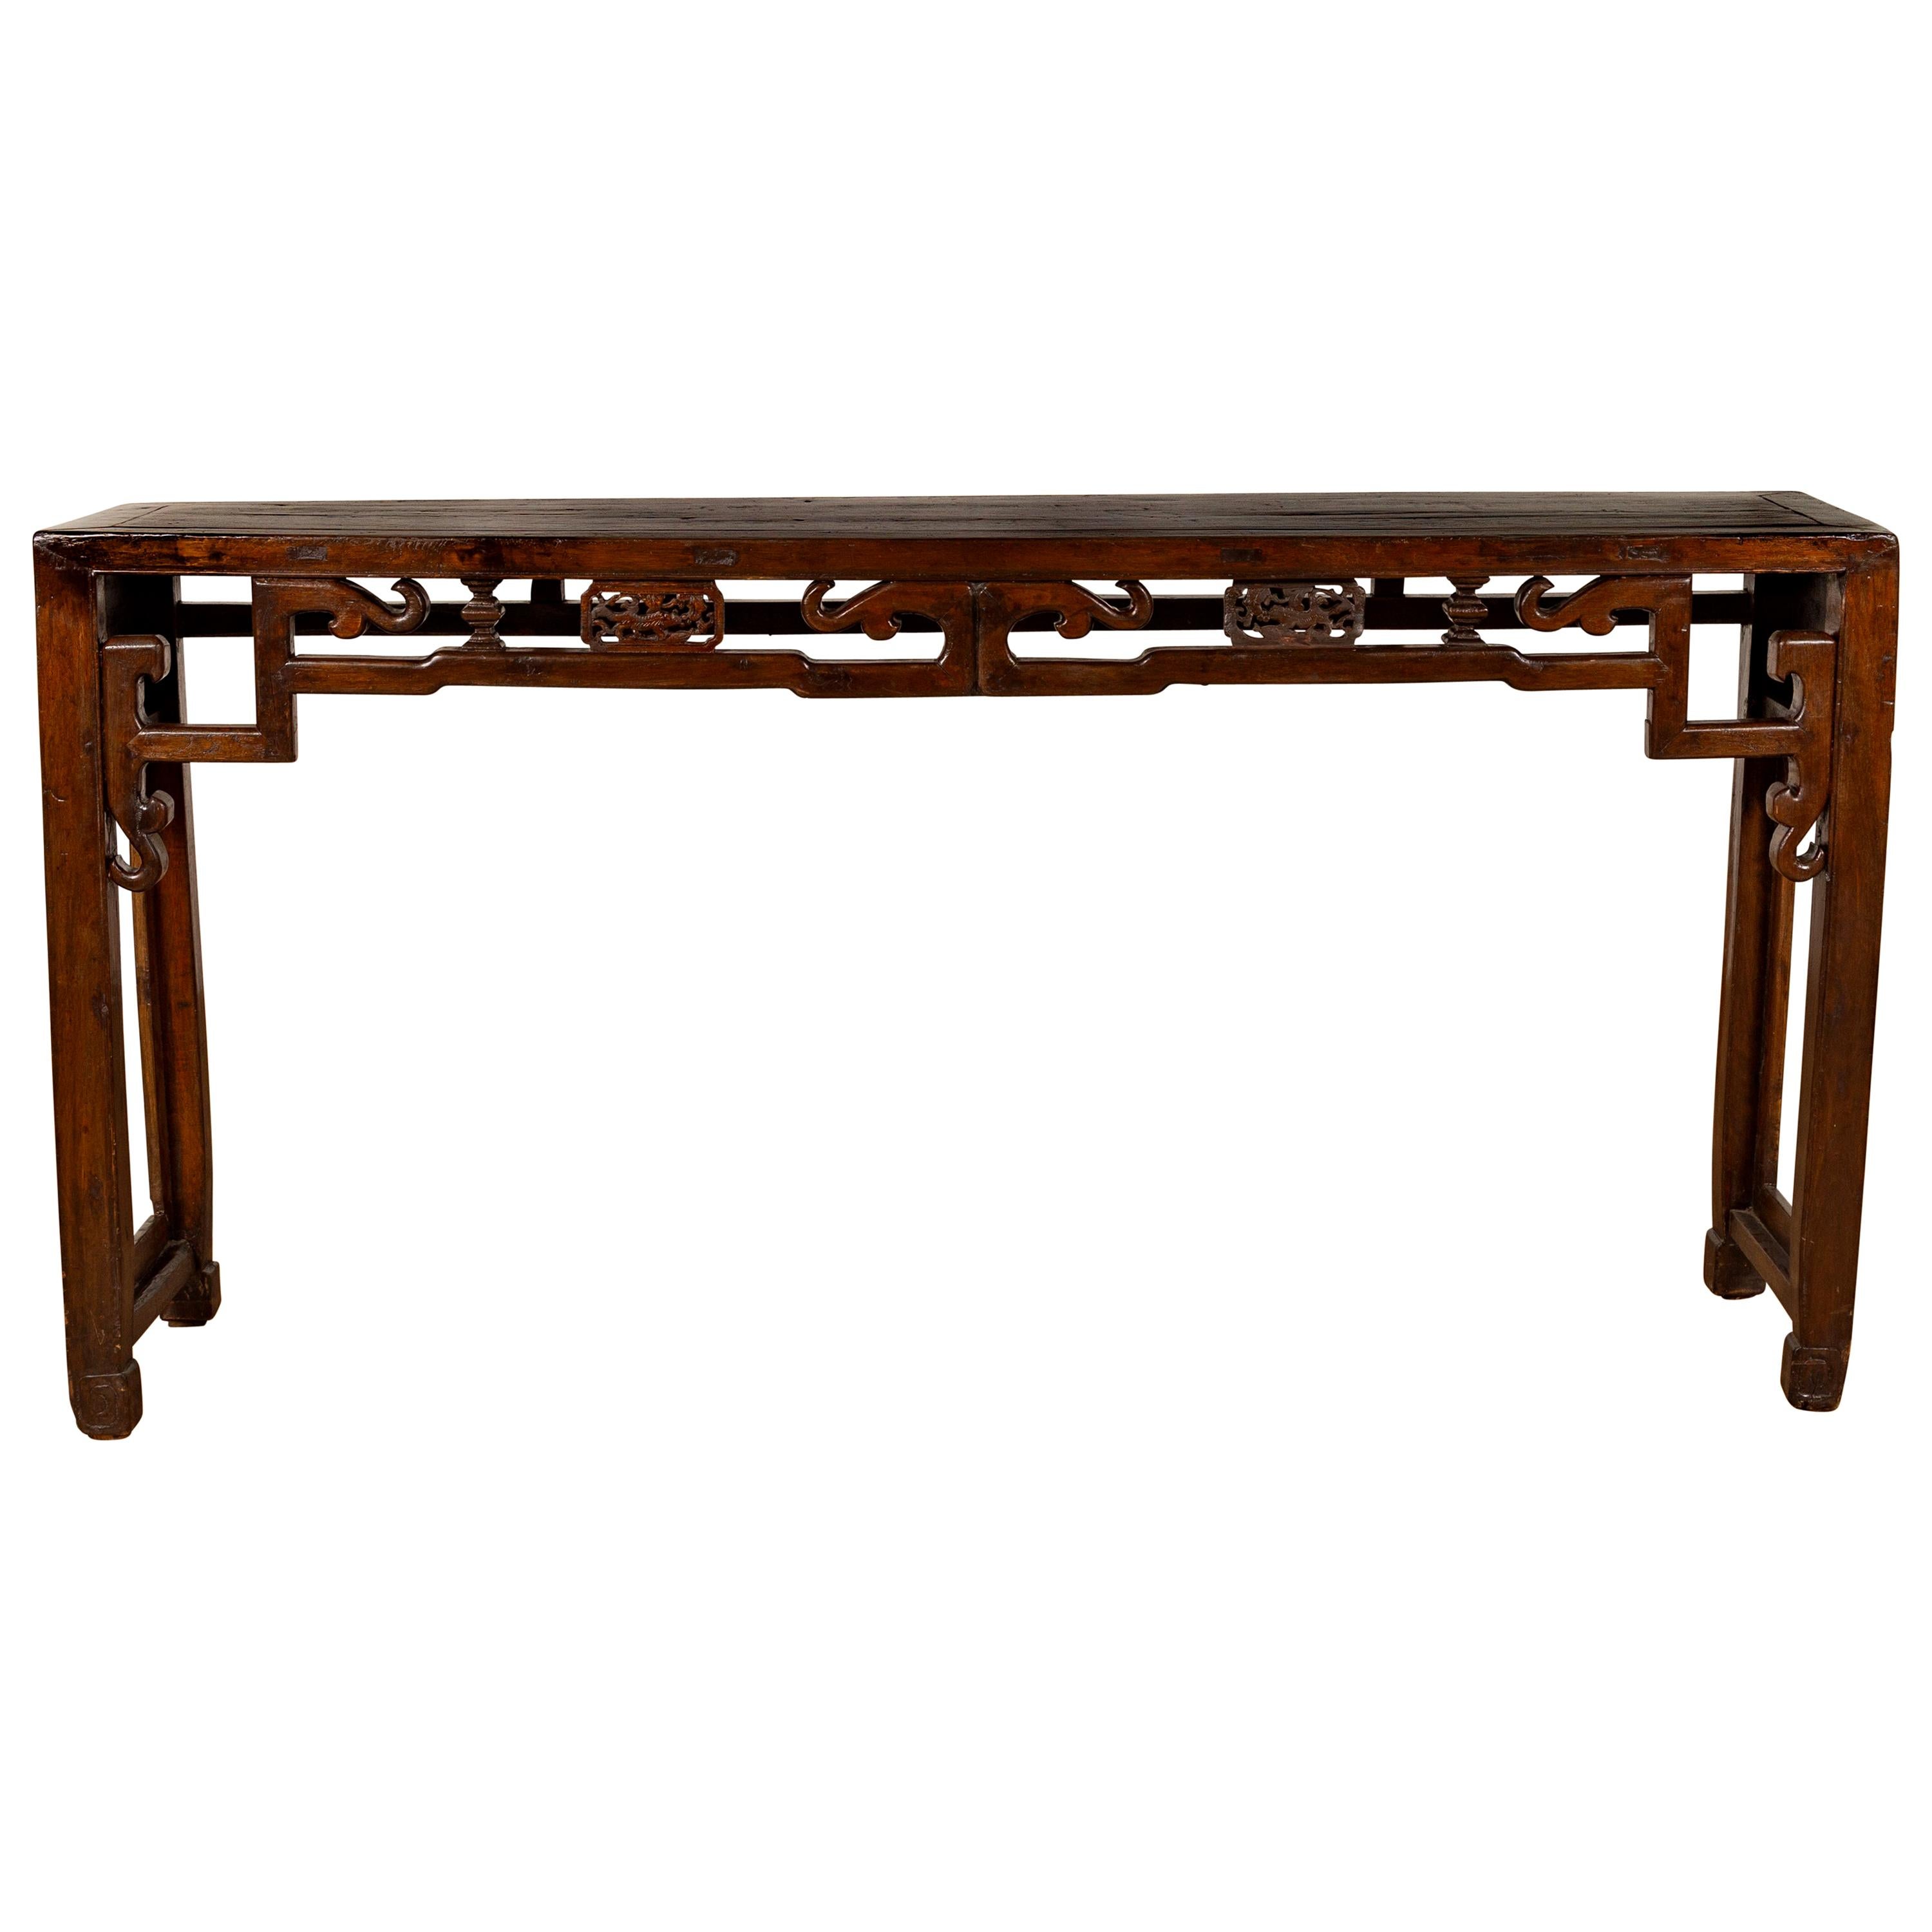 Chinese Narrow Altar Console Table with Open Fretwork Frieze and Horse Hoof Legs